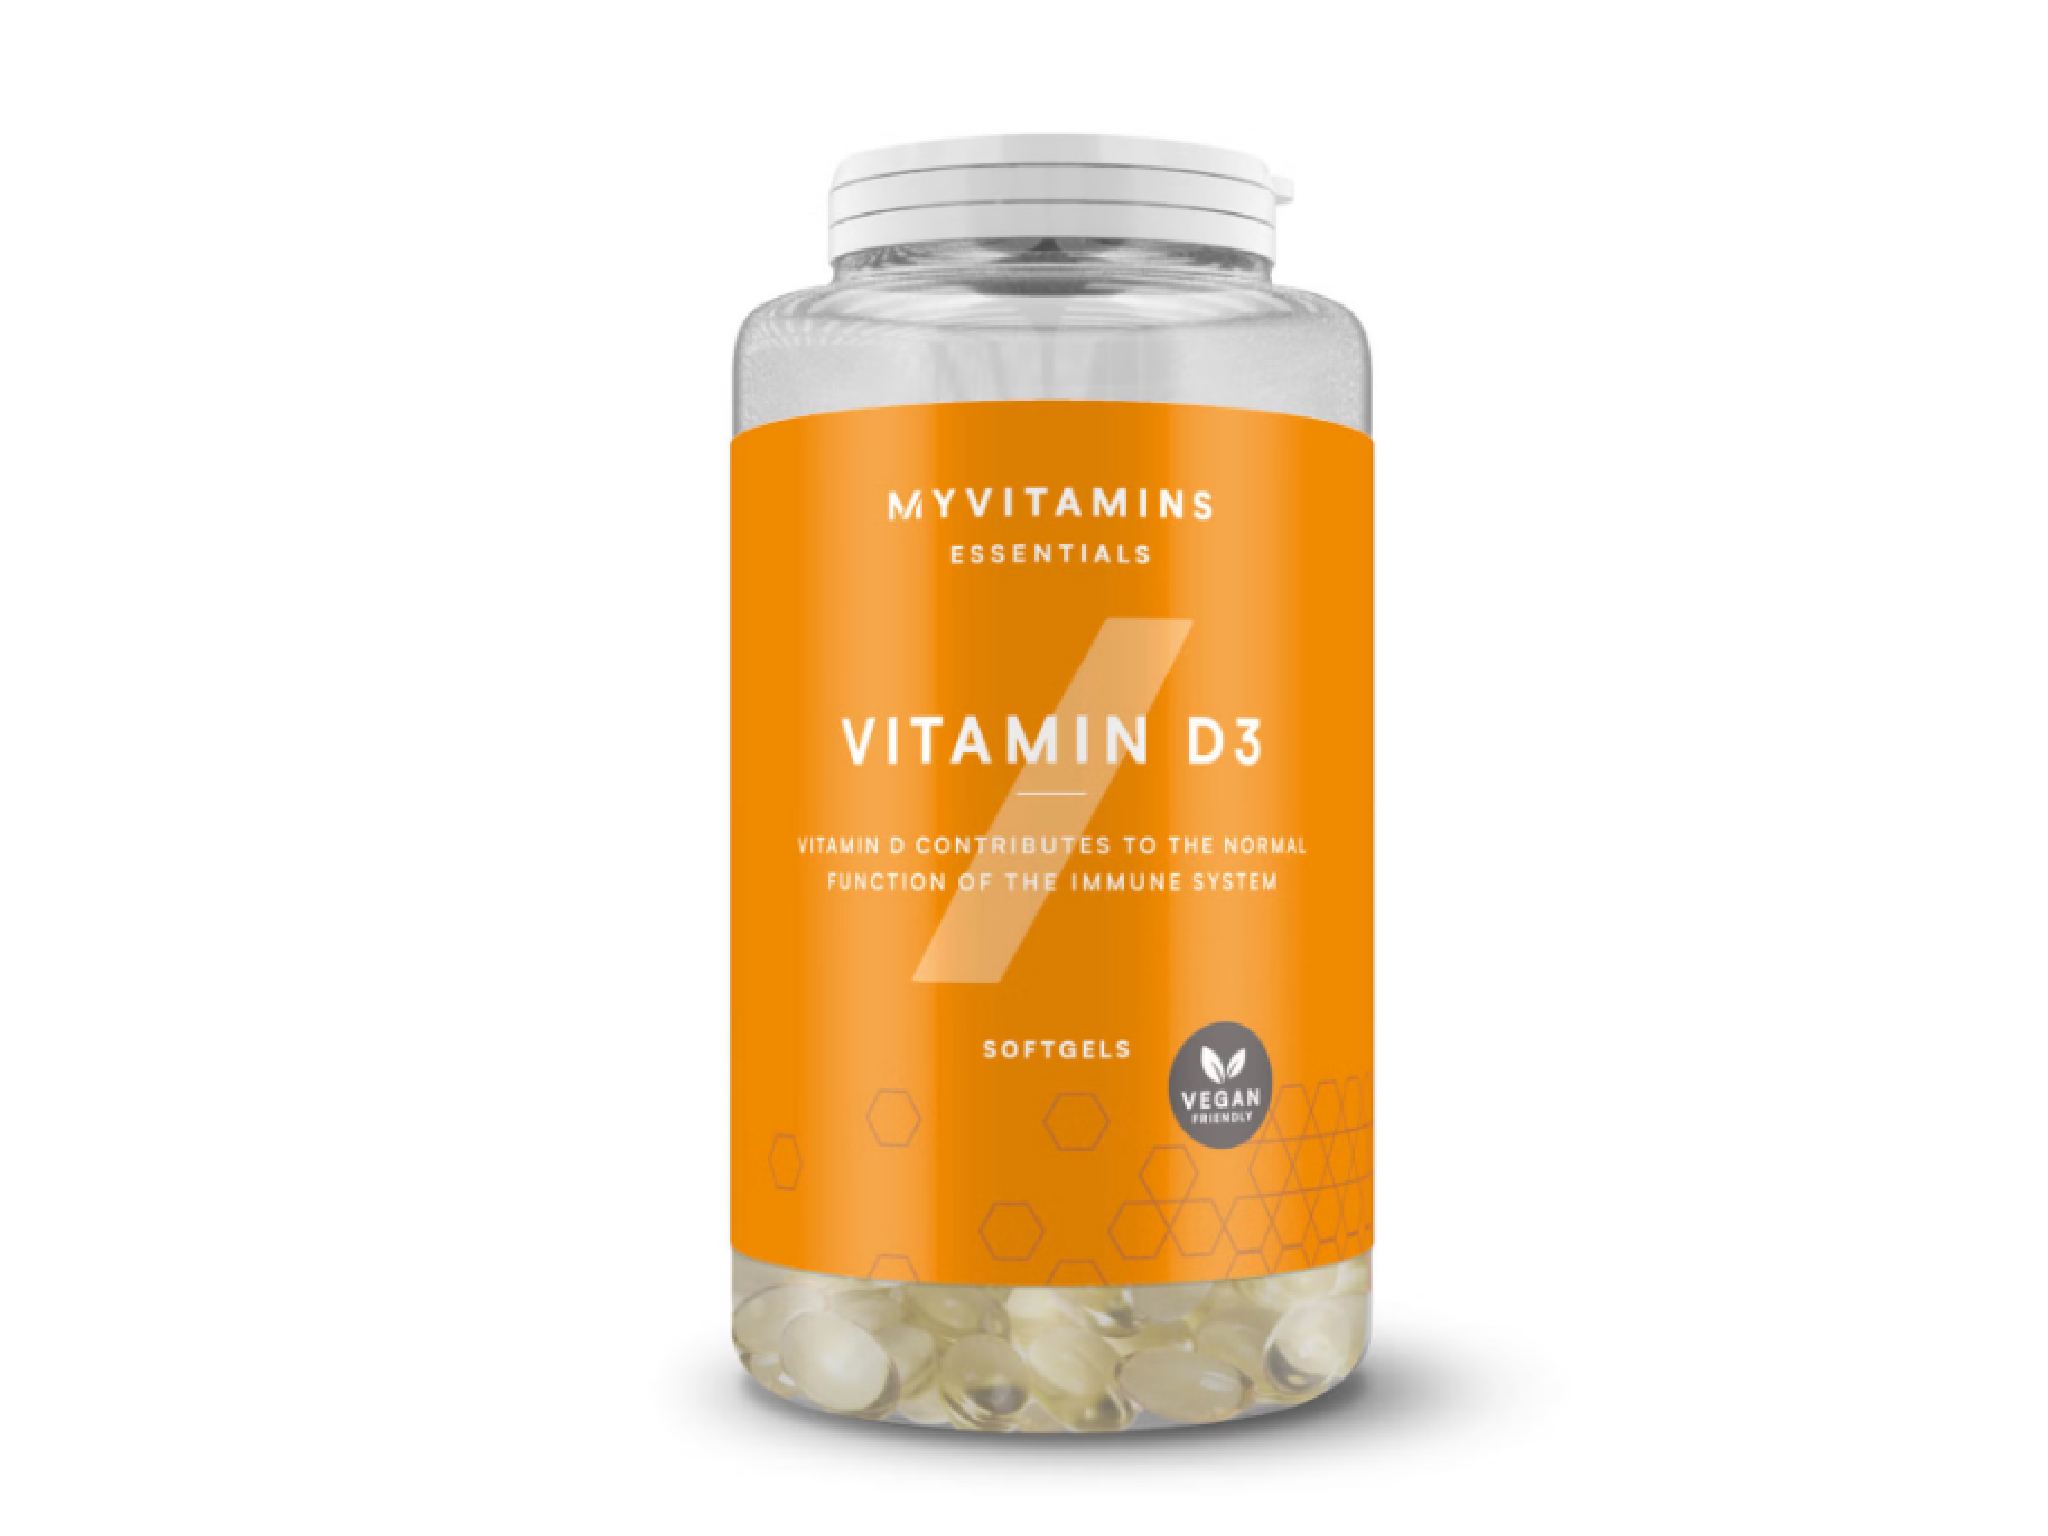 vitamin d, health supplements, indybest, thg fitness, these vitamin d supplements are a firm favourite – here’s why